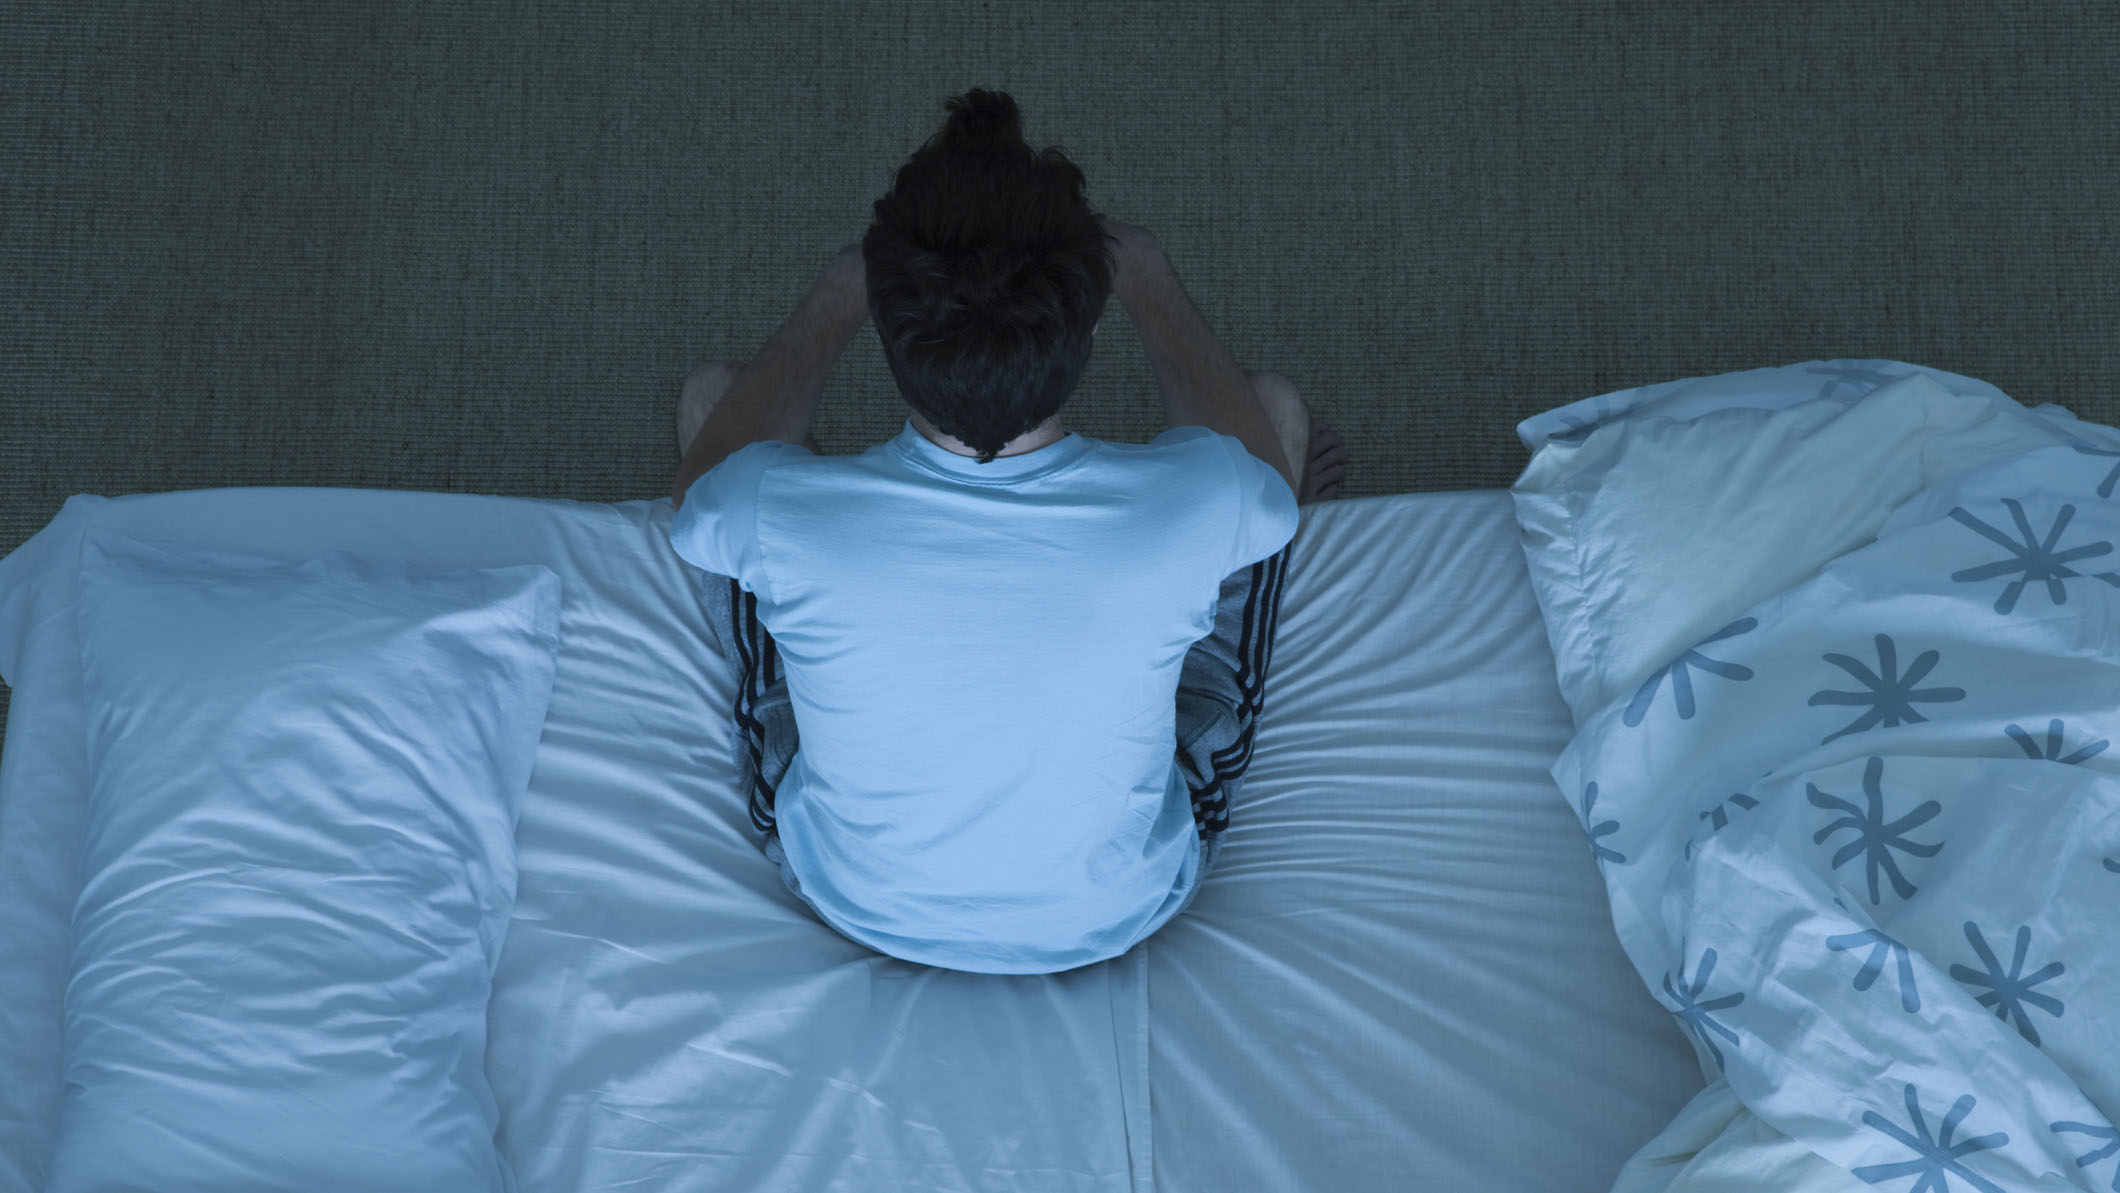 How to sleep better: A man sits on the edge of the bed because he is too stressed to sleep